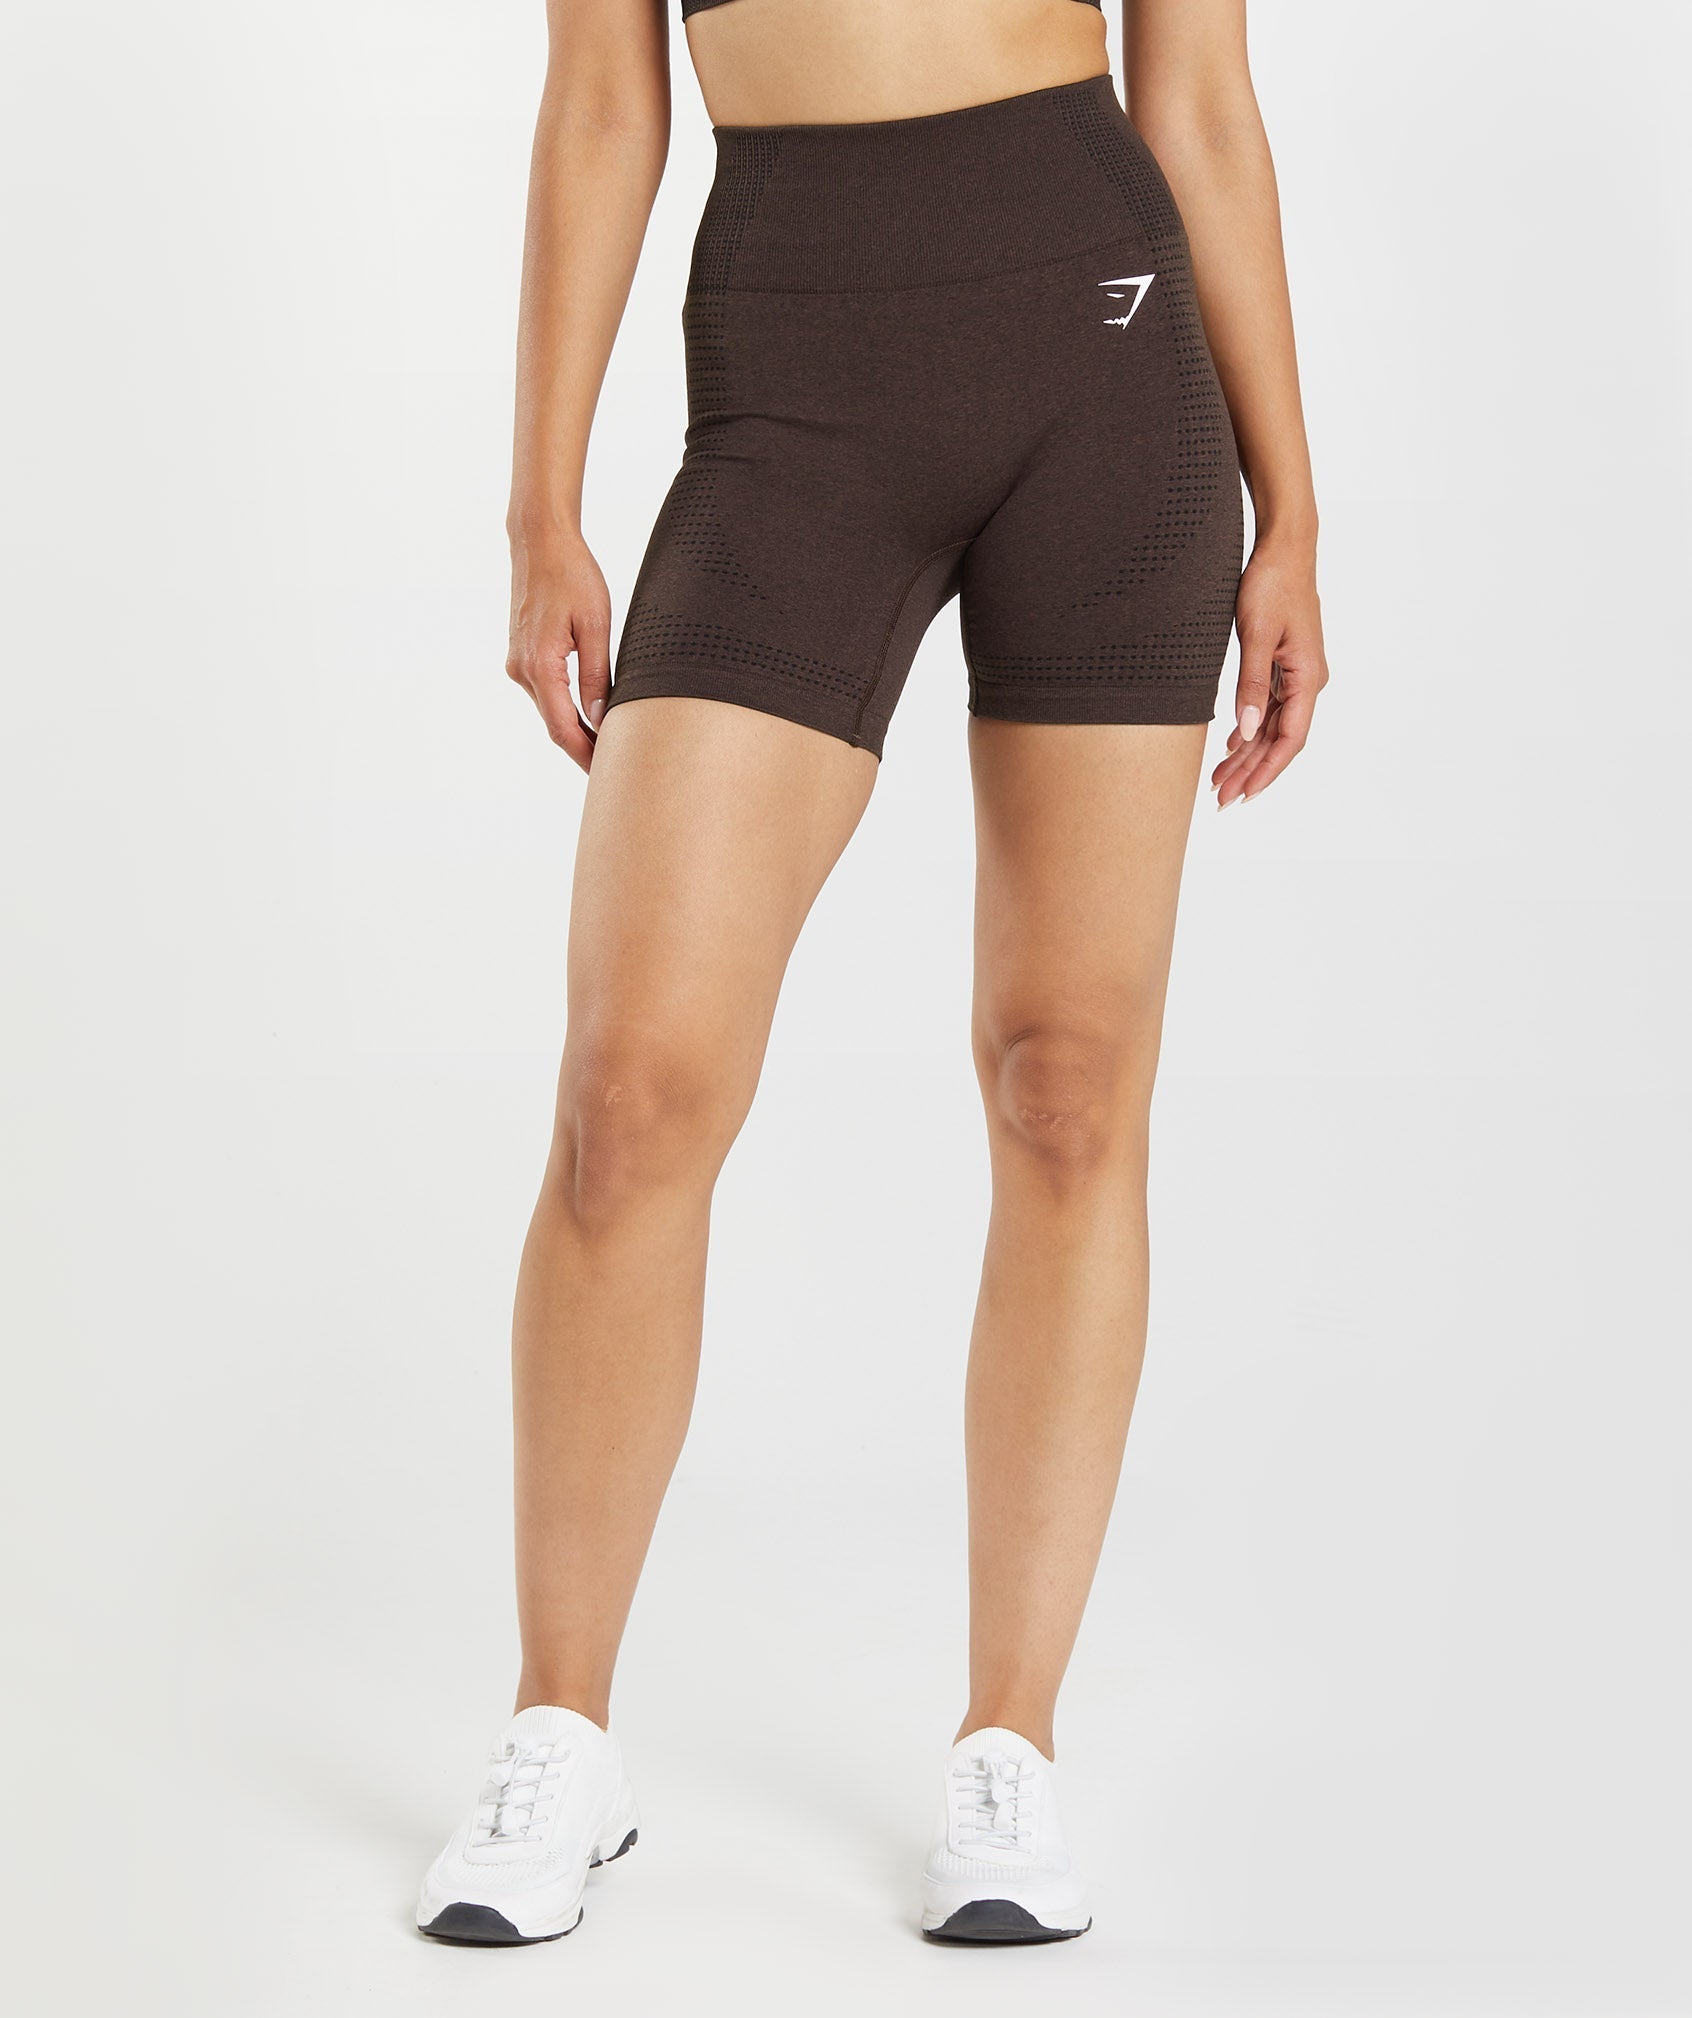 Vital Seamless 2.0 Shorts in Cherry Brown Marl - view 3